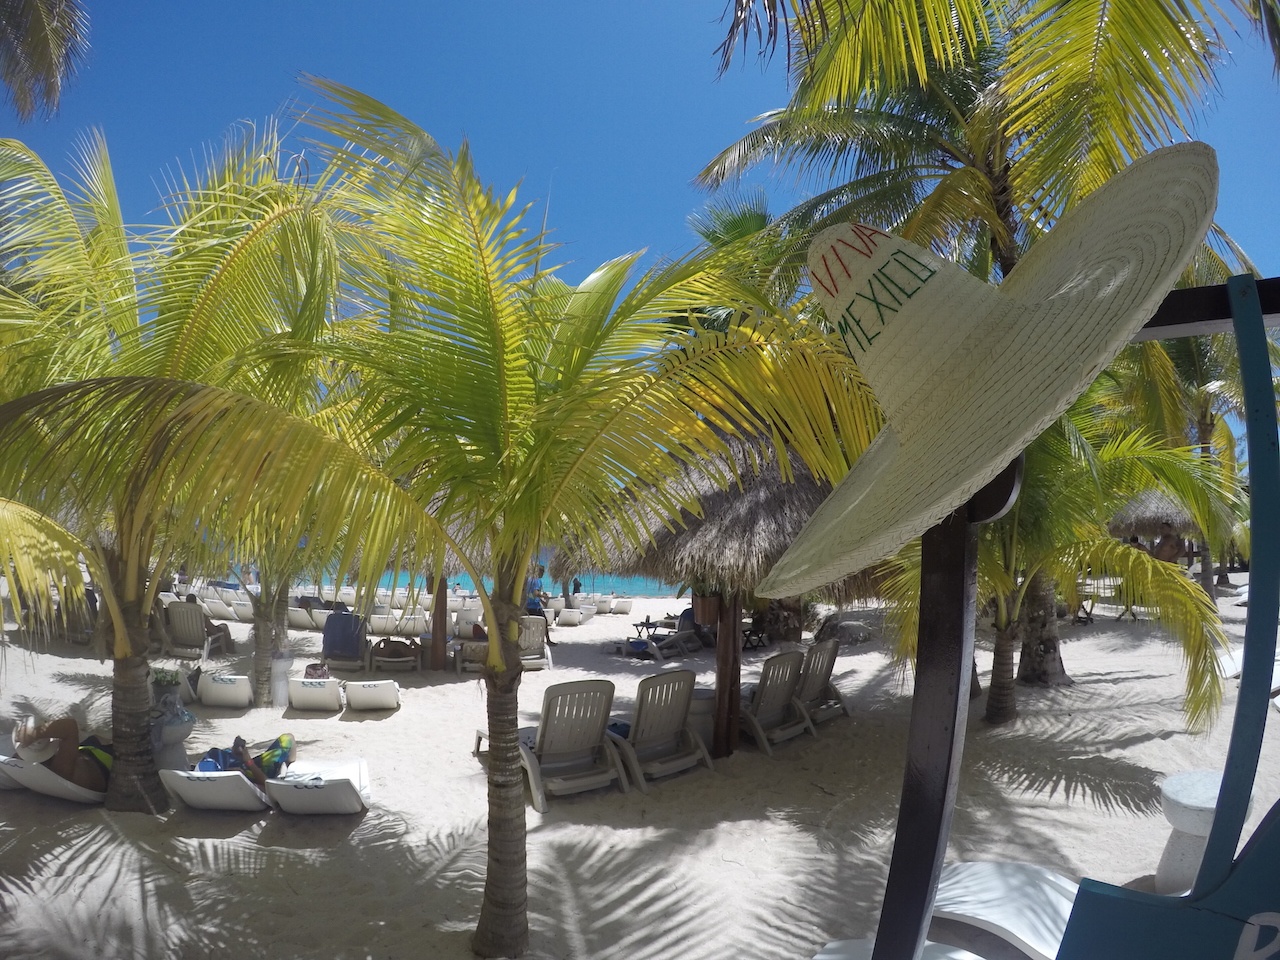 Cruise to Cozumel - My Day in Paradise